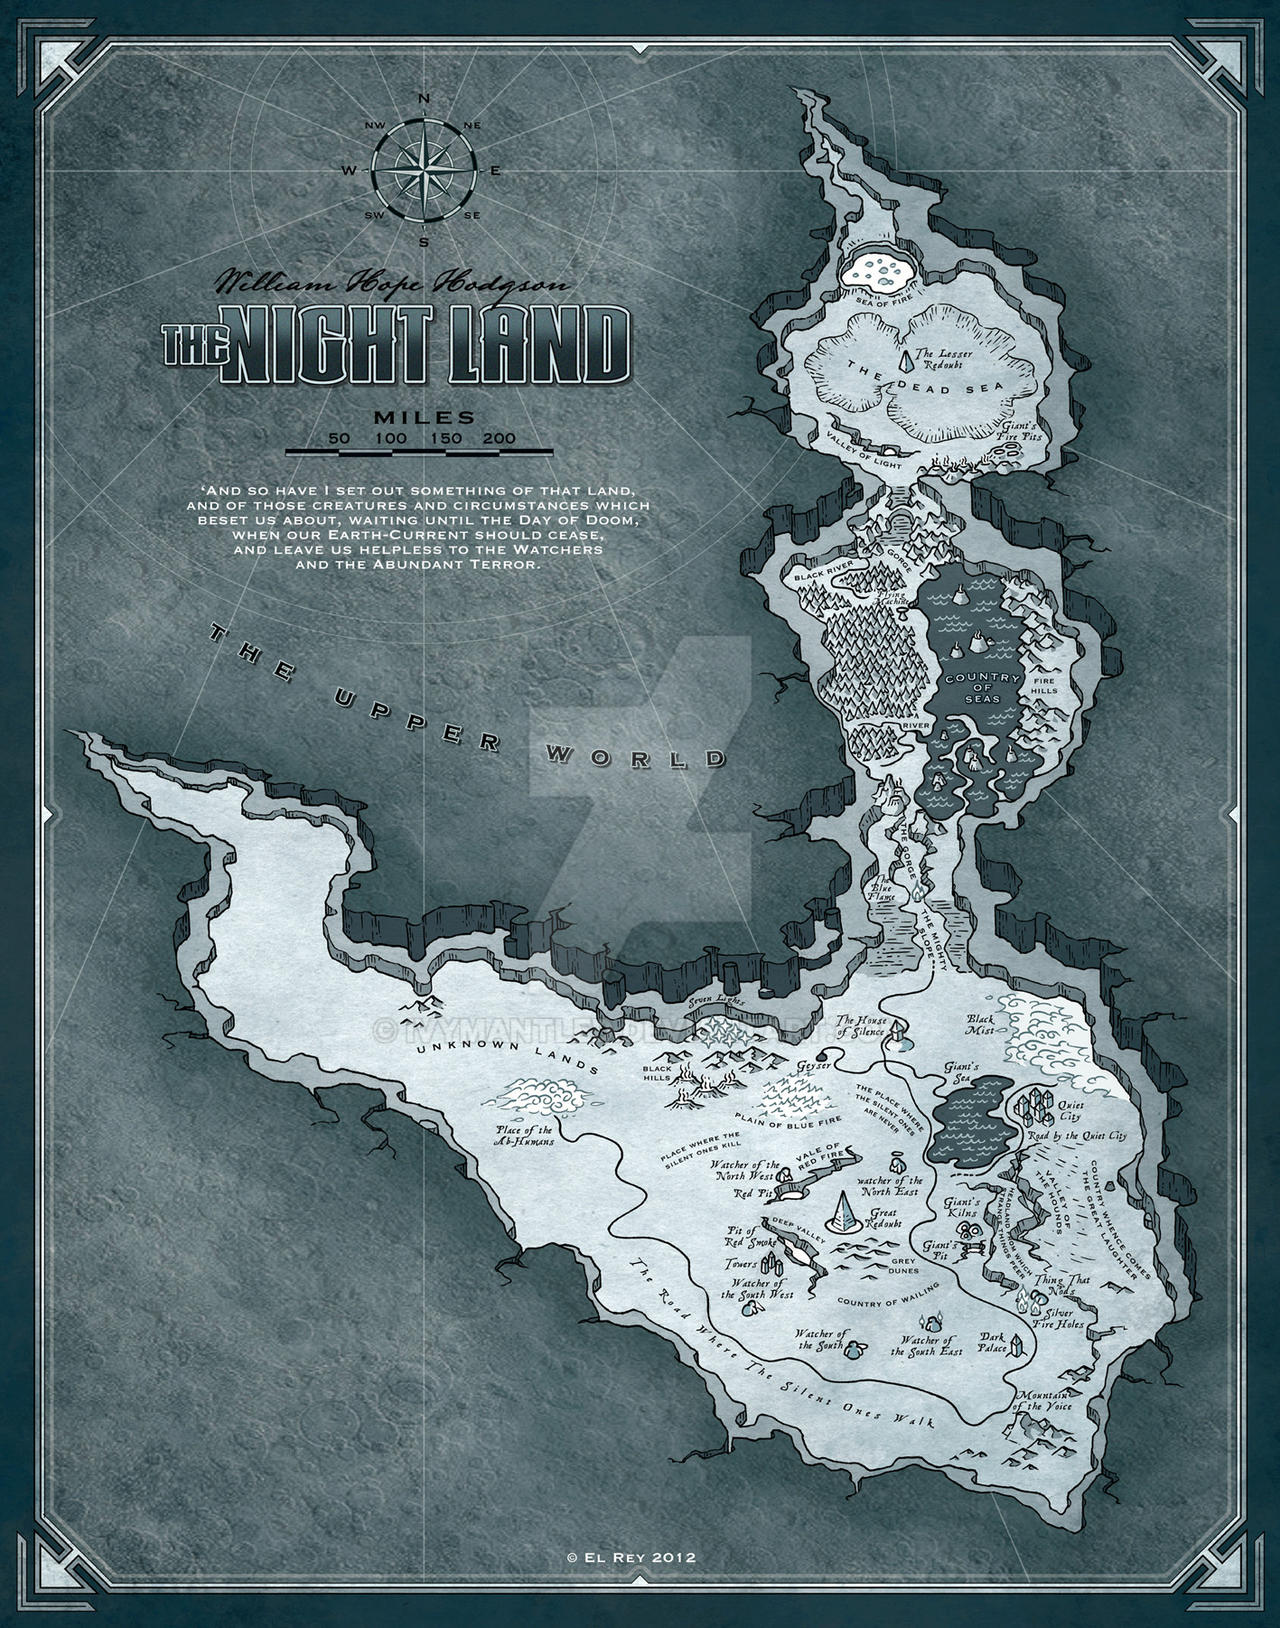 the_night_land_map_by_ivymantled-d4vfvqy.jpg